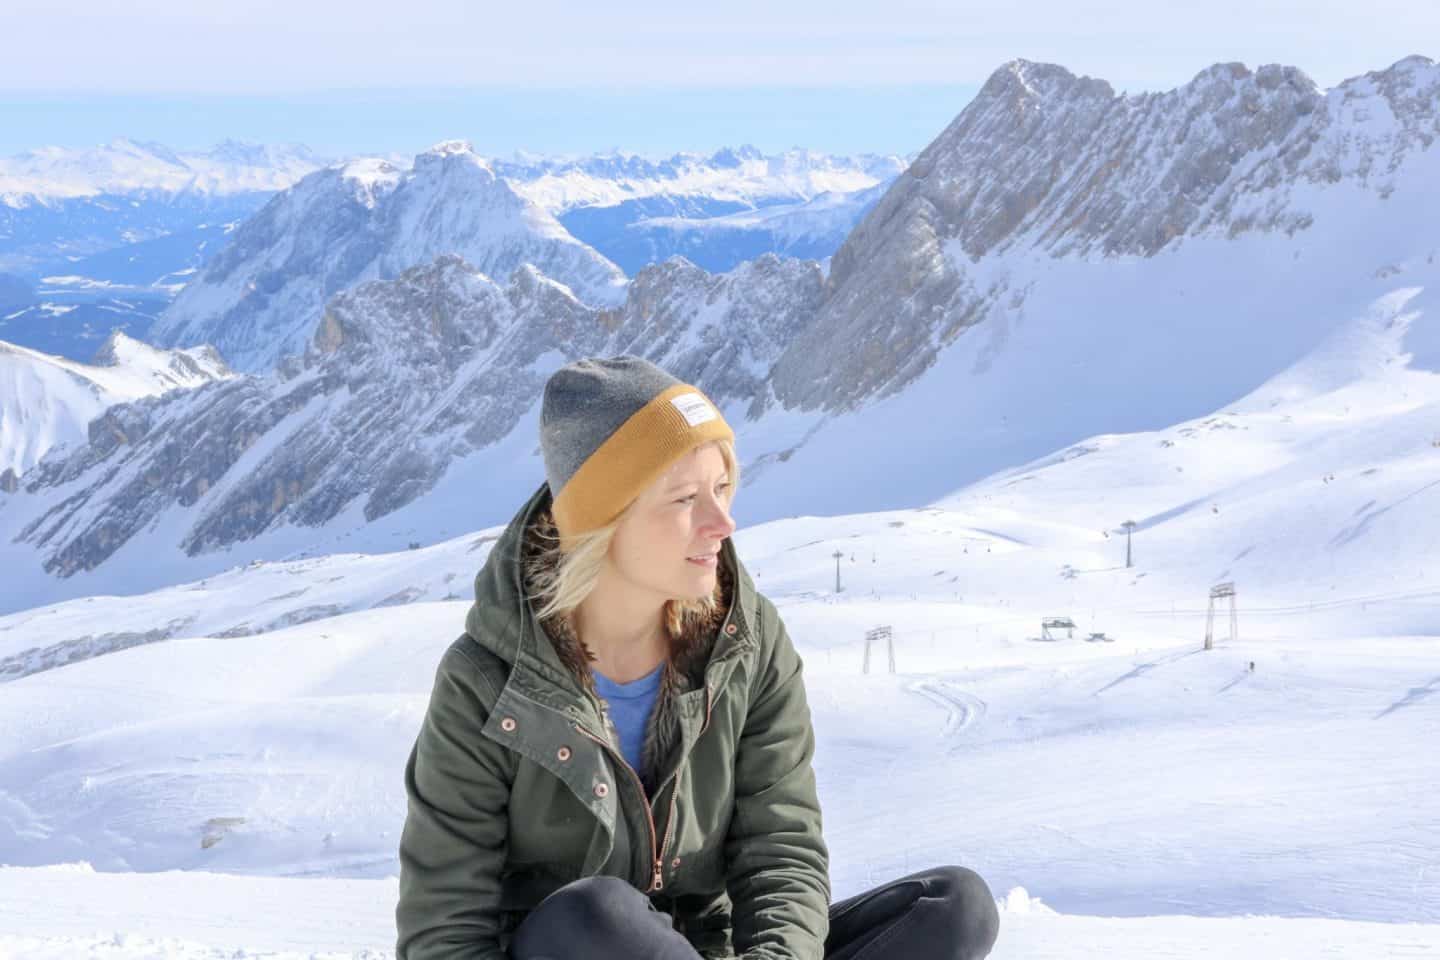 Blonde girl with hat on in front of a snowy mountain